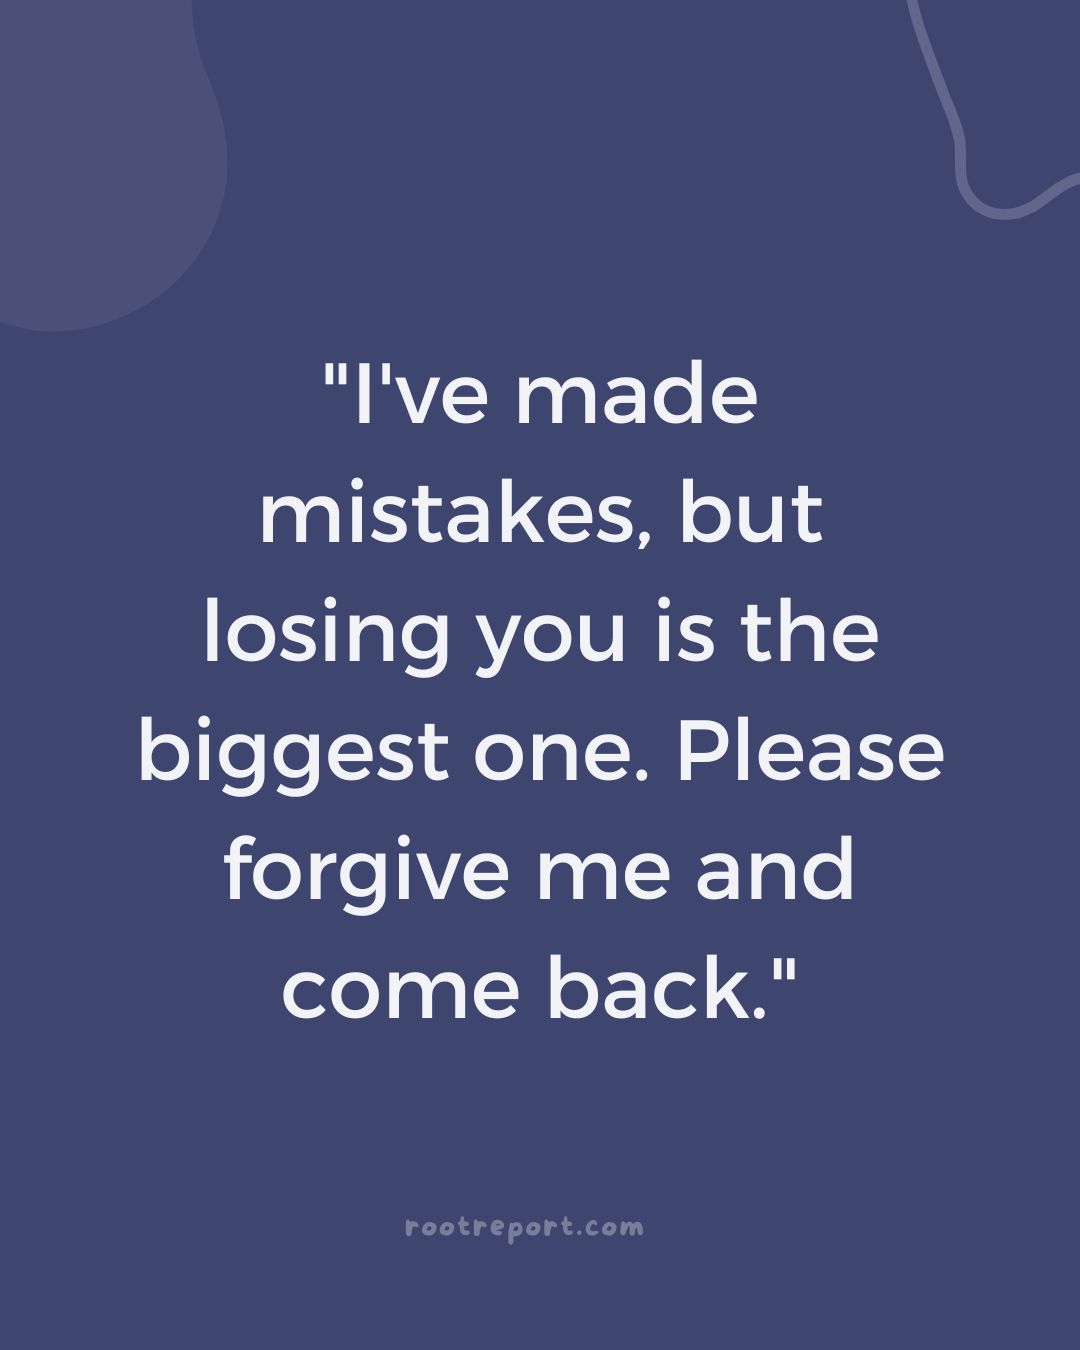 "I've made mistakes, but losing you is the biggest one. Please forgive me and come back."